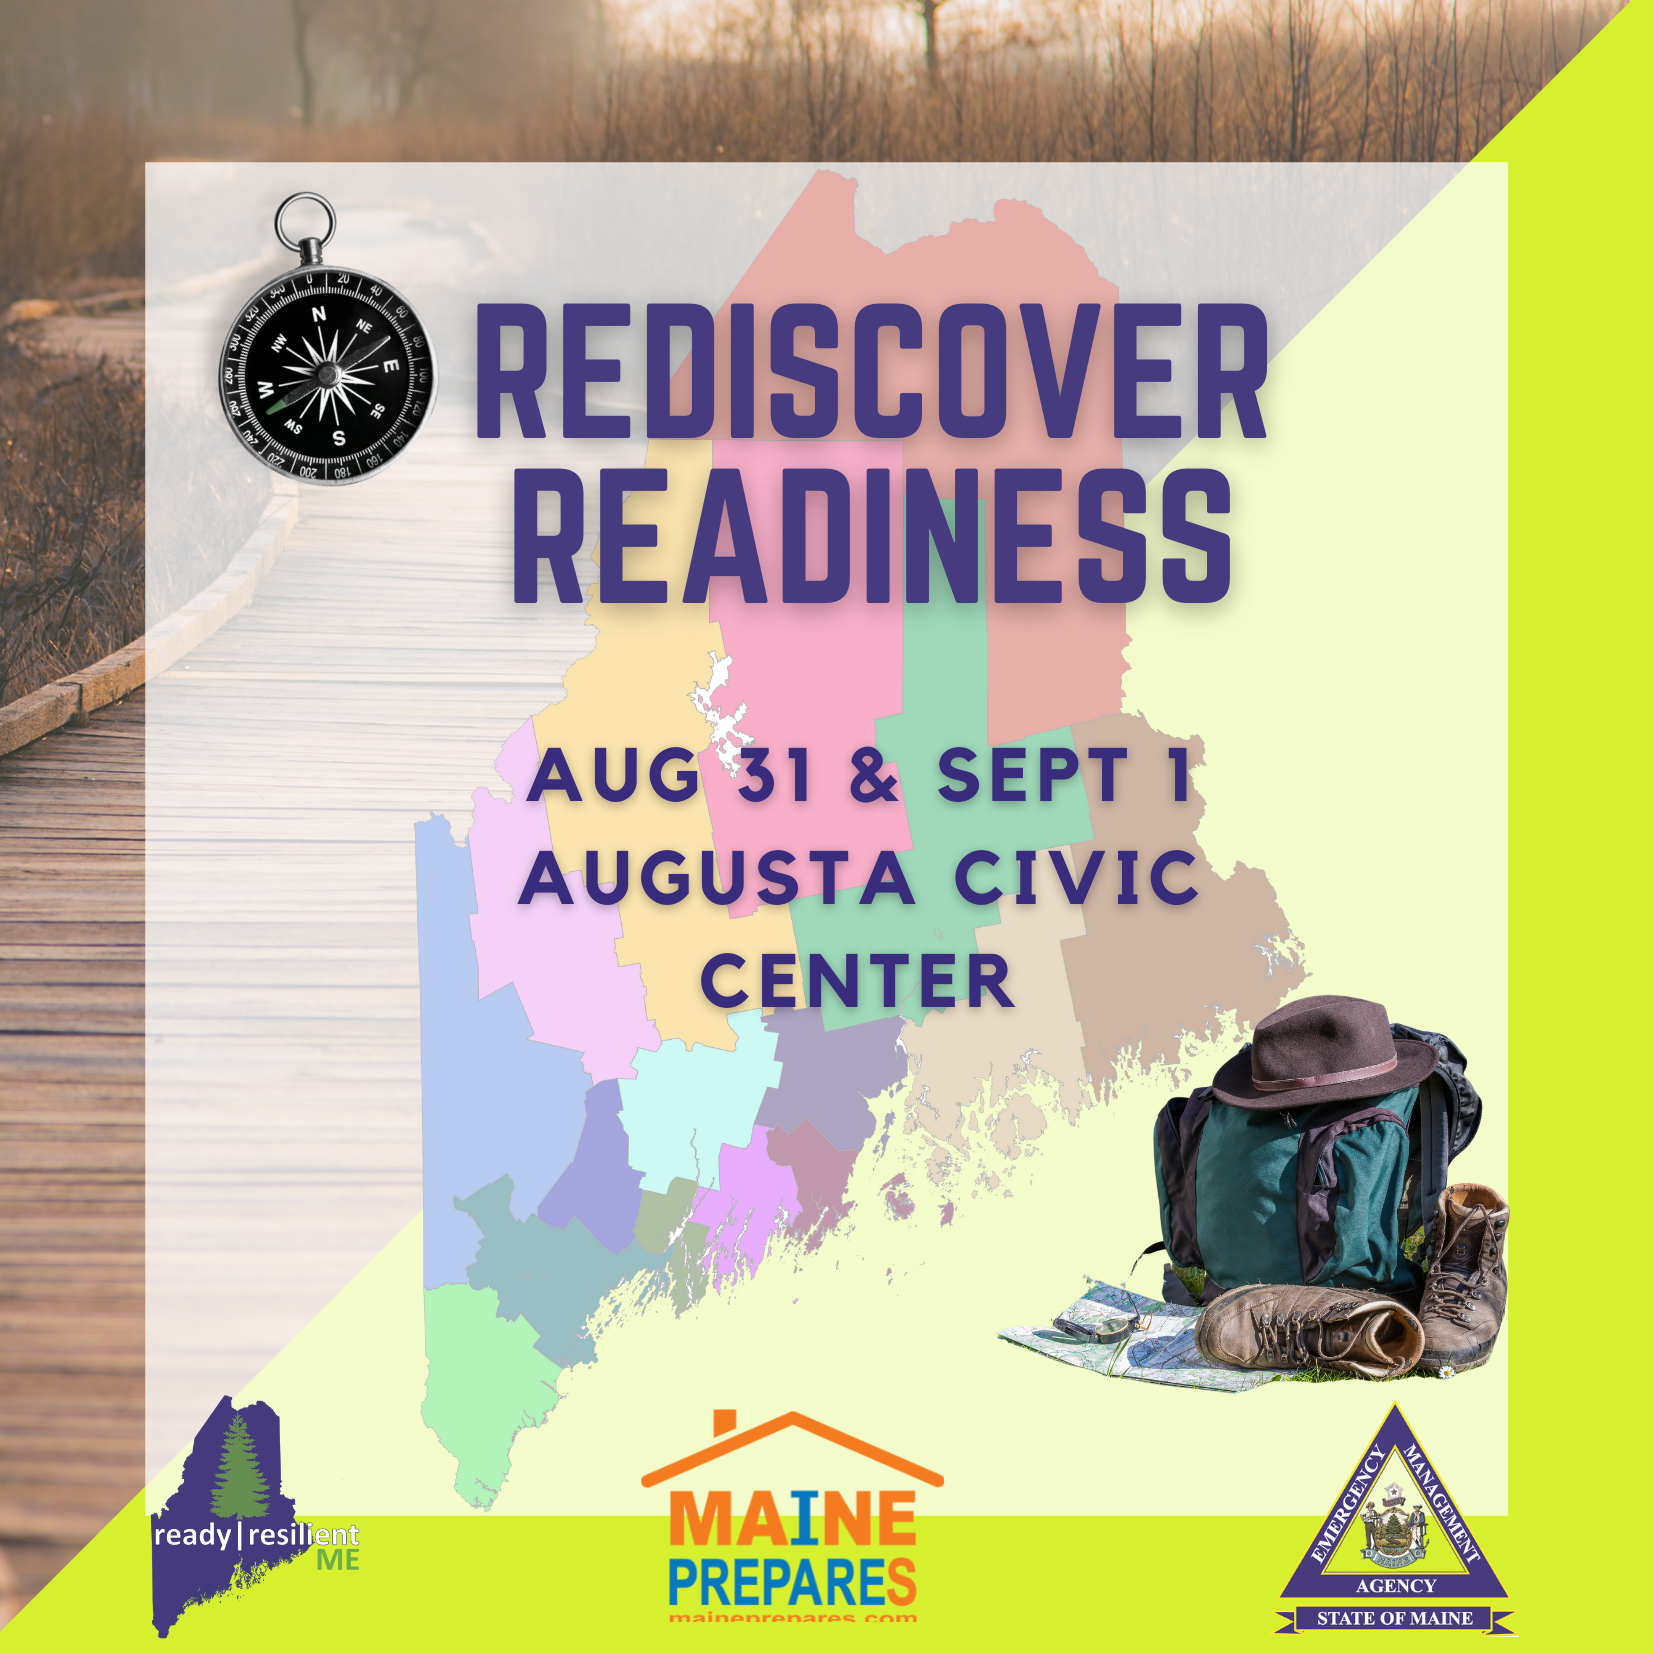 Rediscover Readiness - Aug. 31 & Sept. 1, 2022 - Augusta Civic Center